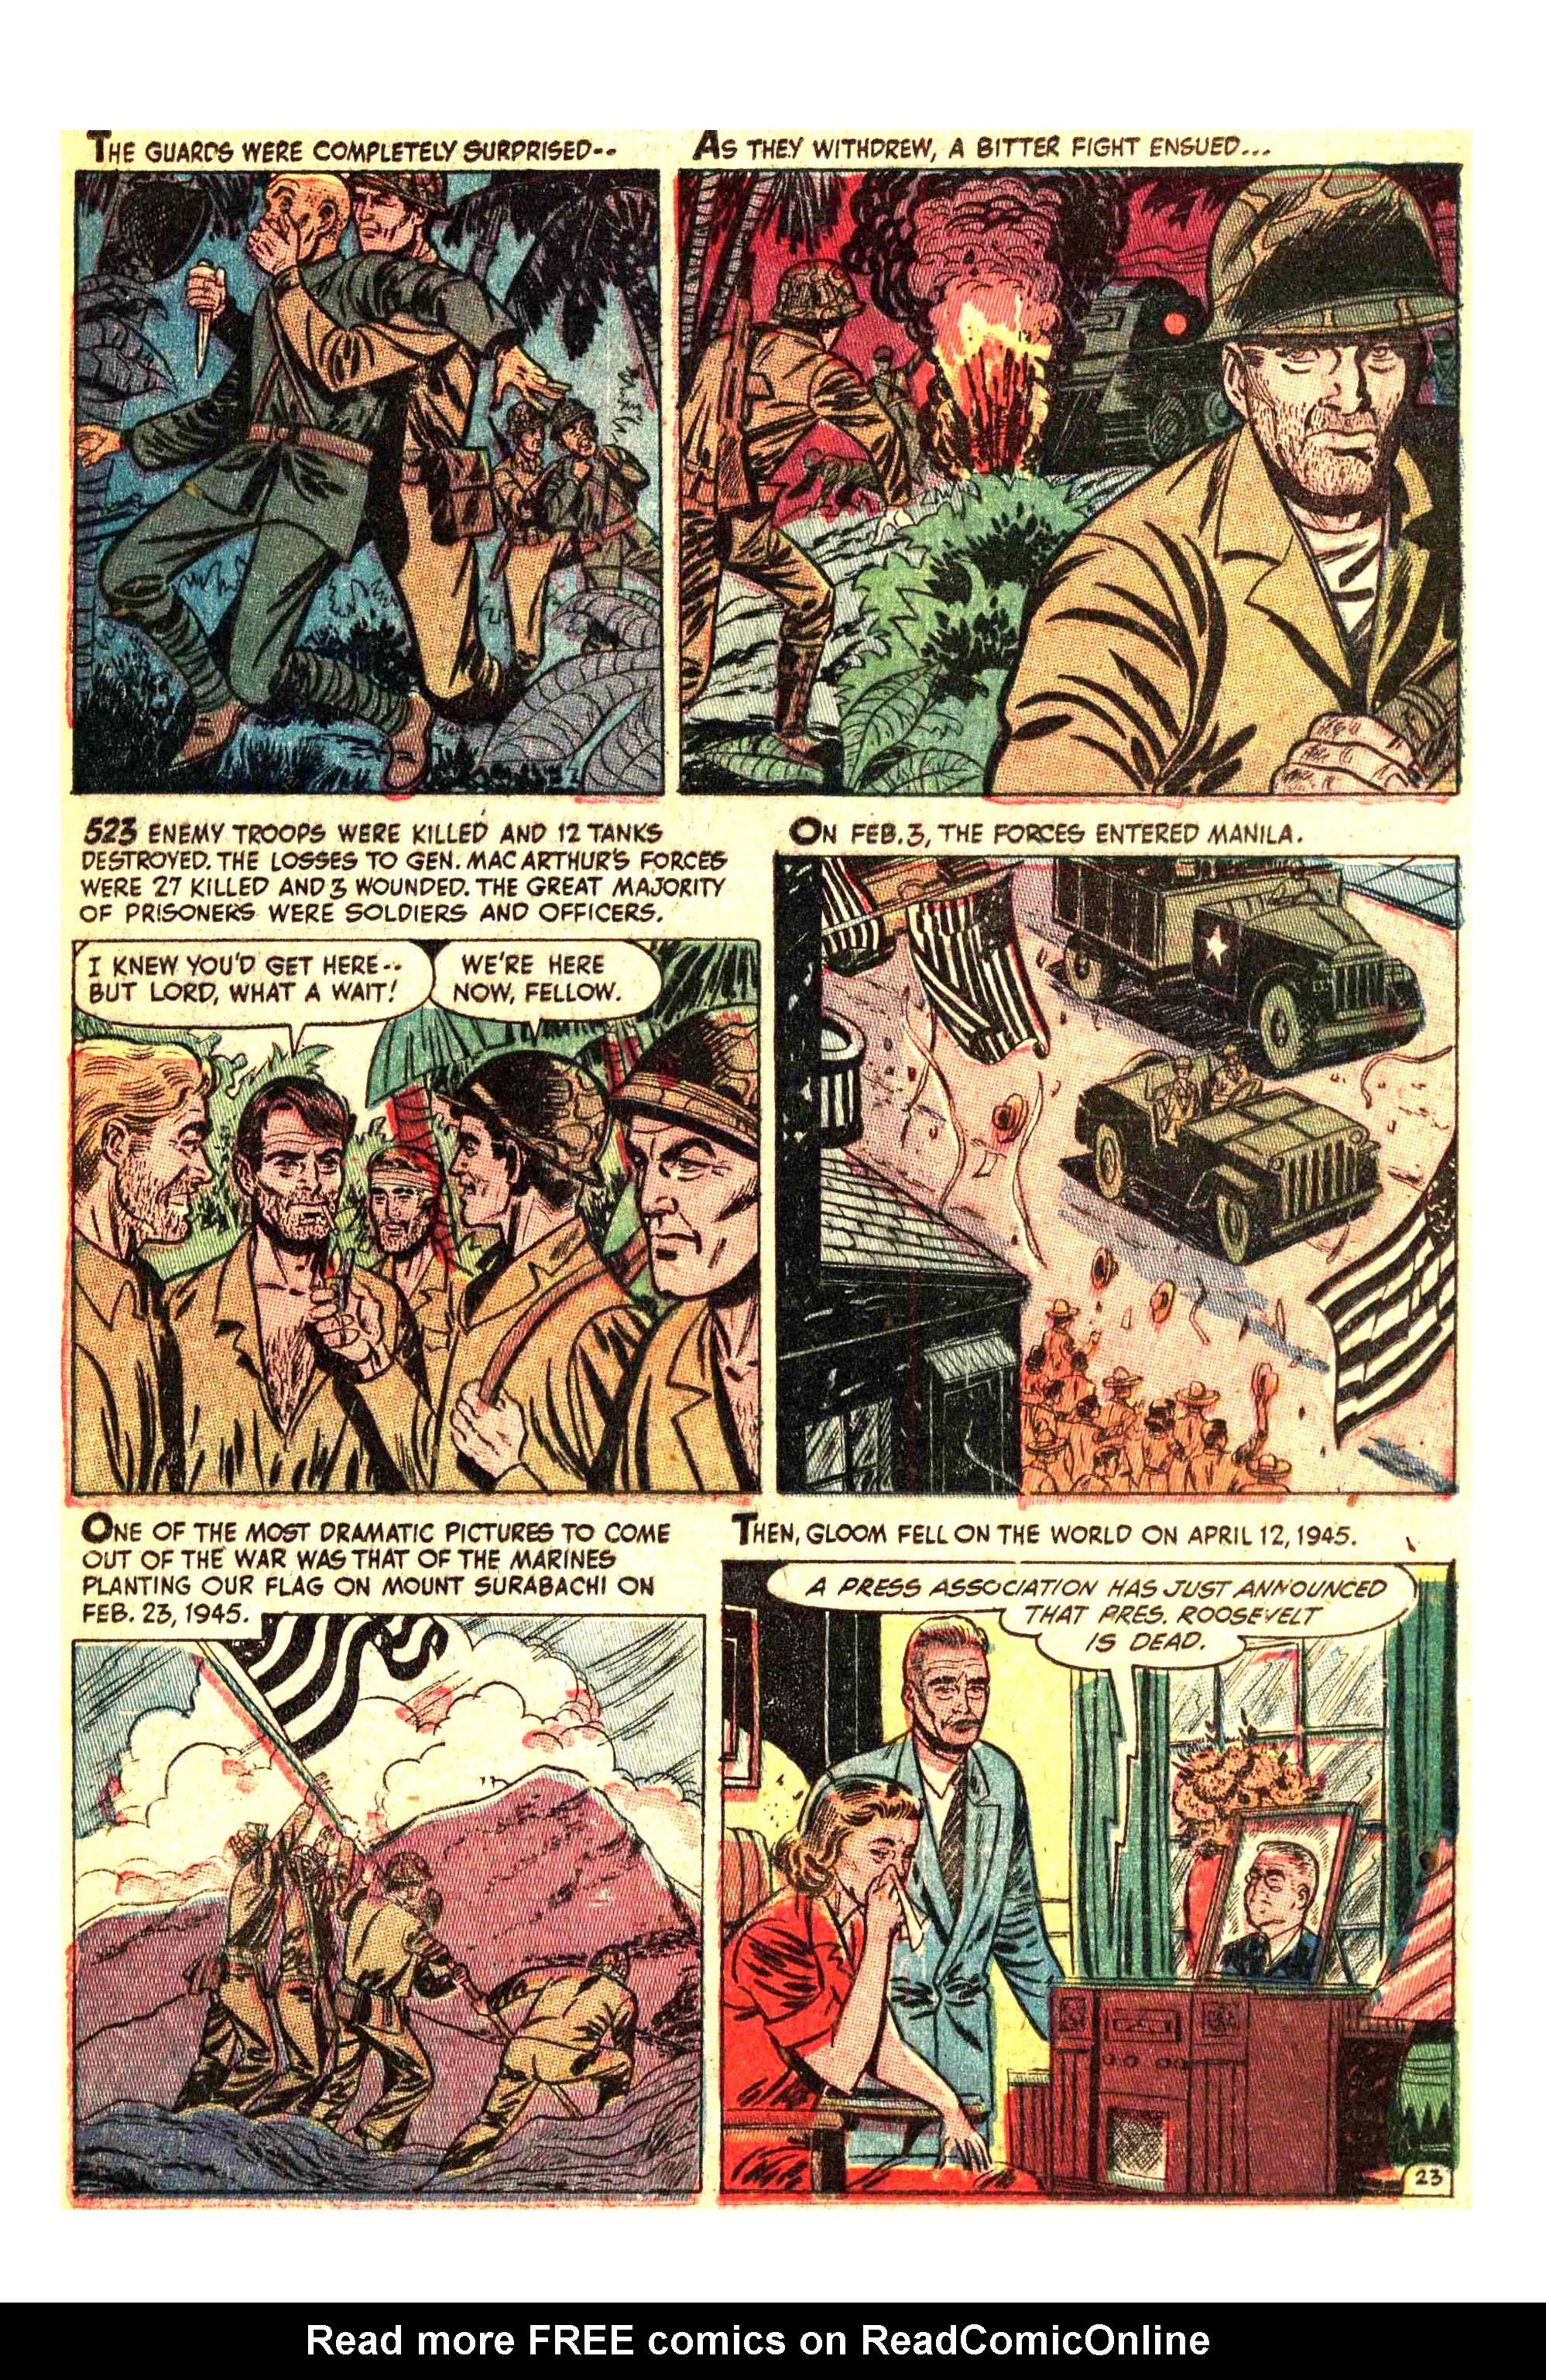 Read online MacArthur: The Great American comic -  Issue # Full - 25